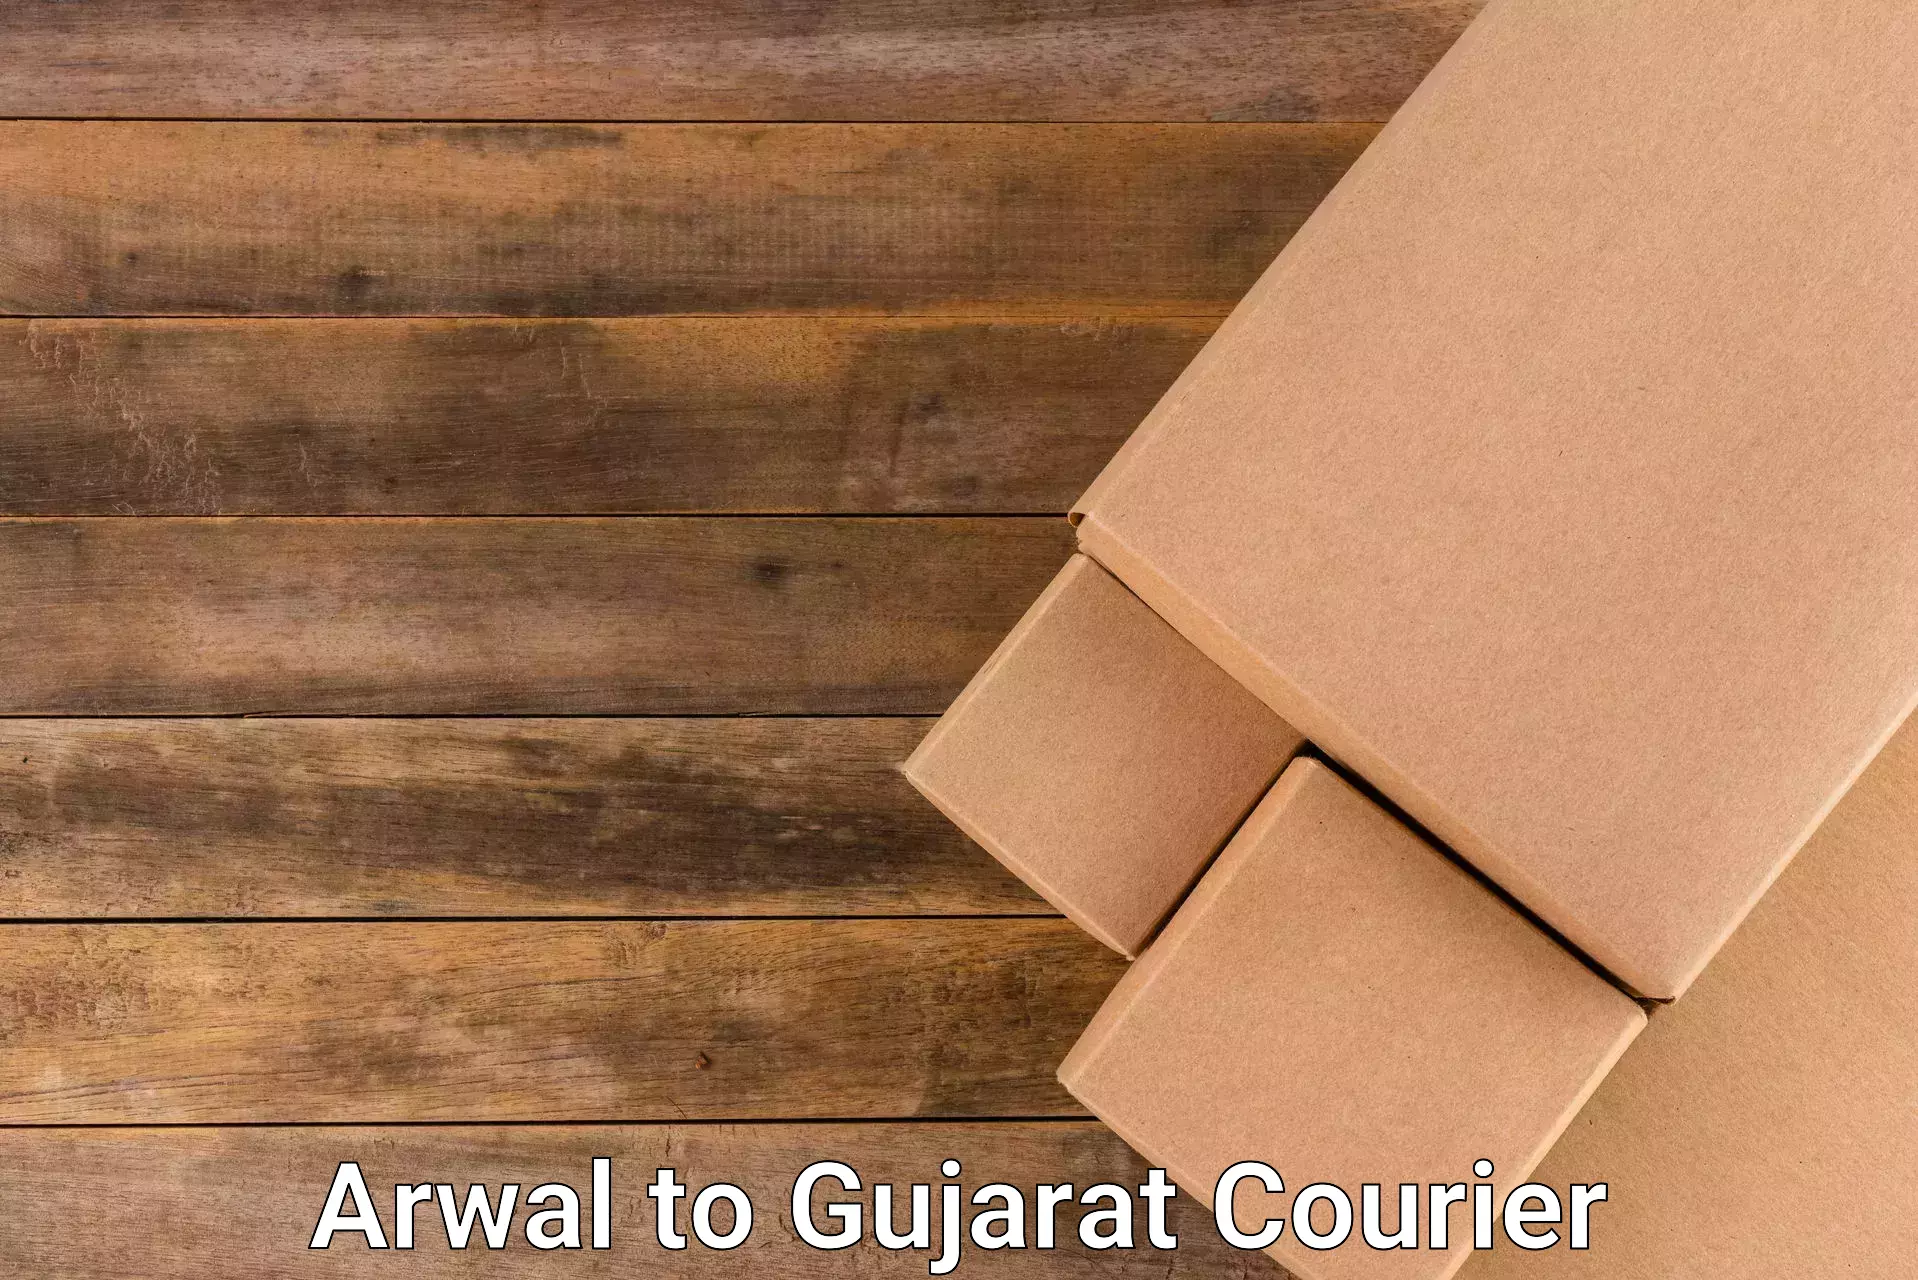 24-hour courier service Arwal to Talala